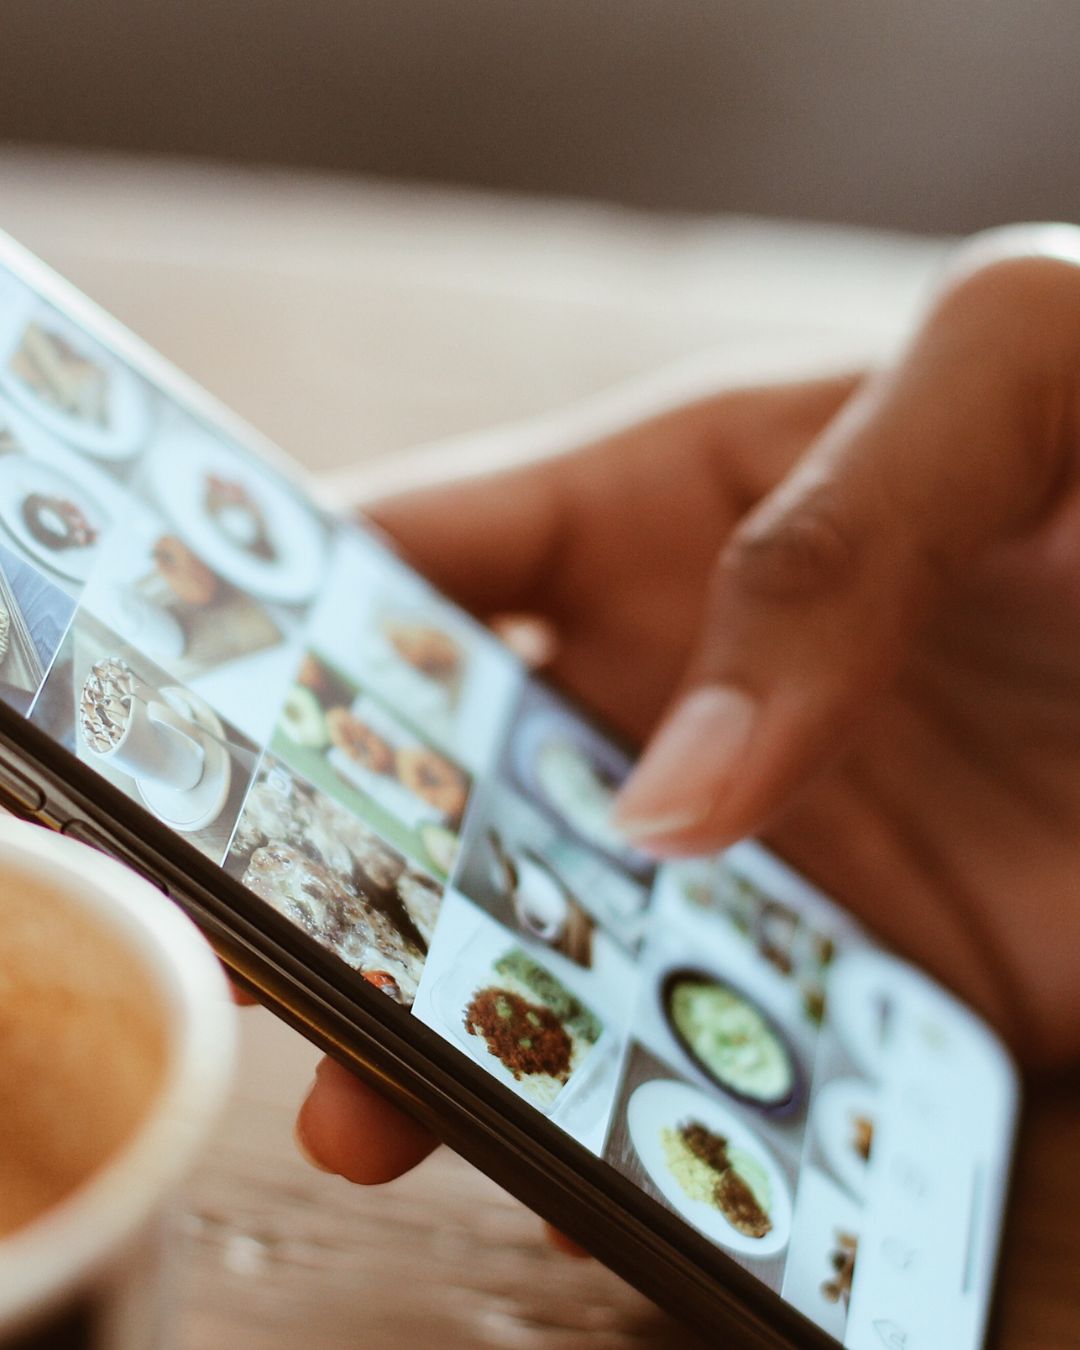 A hand with tan skin scrolls a phone screen full of pictures of food next to a coffee mug.